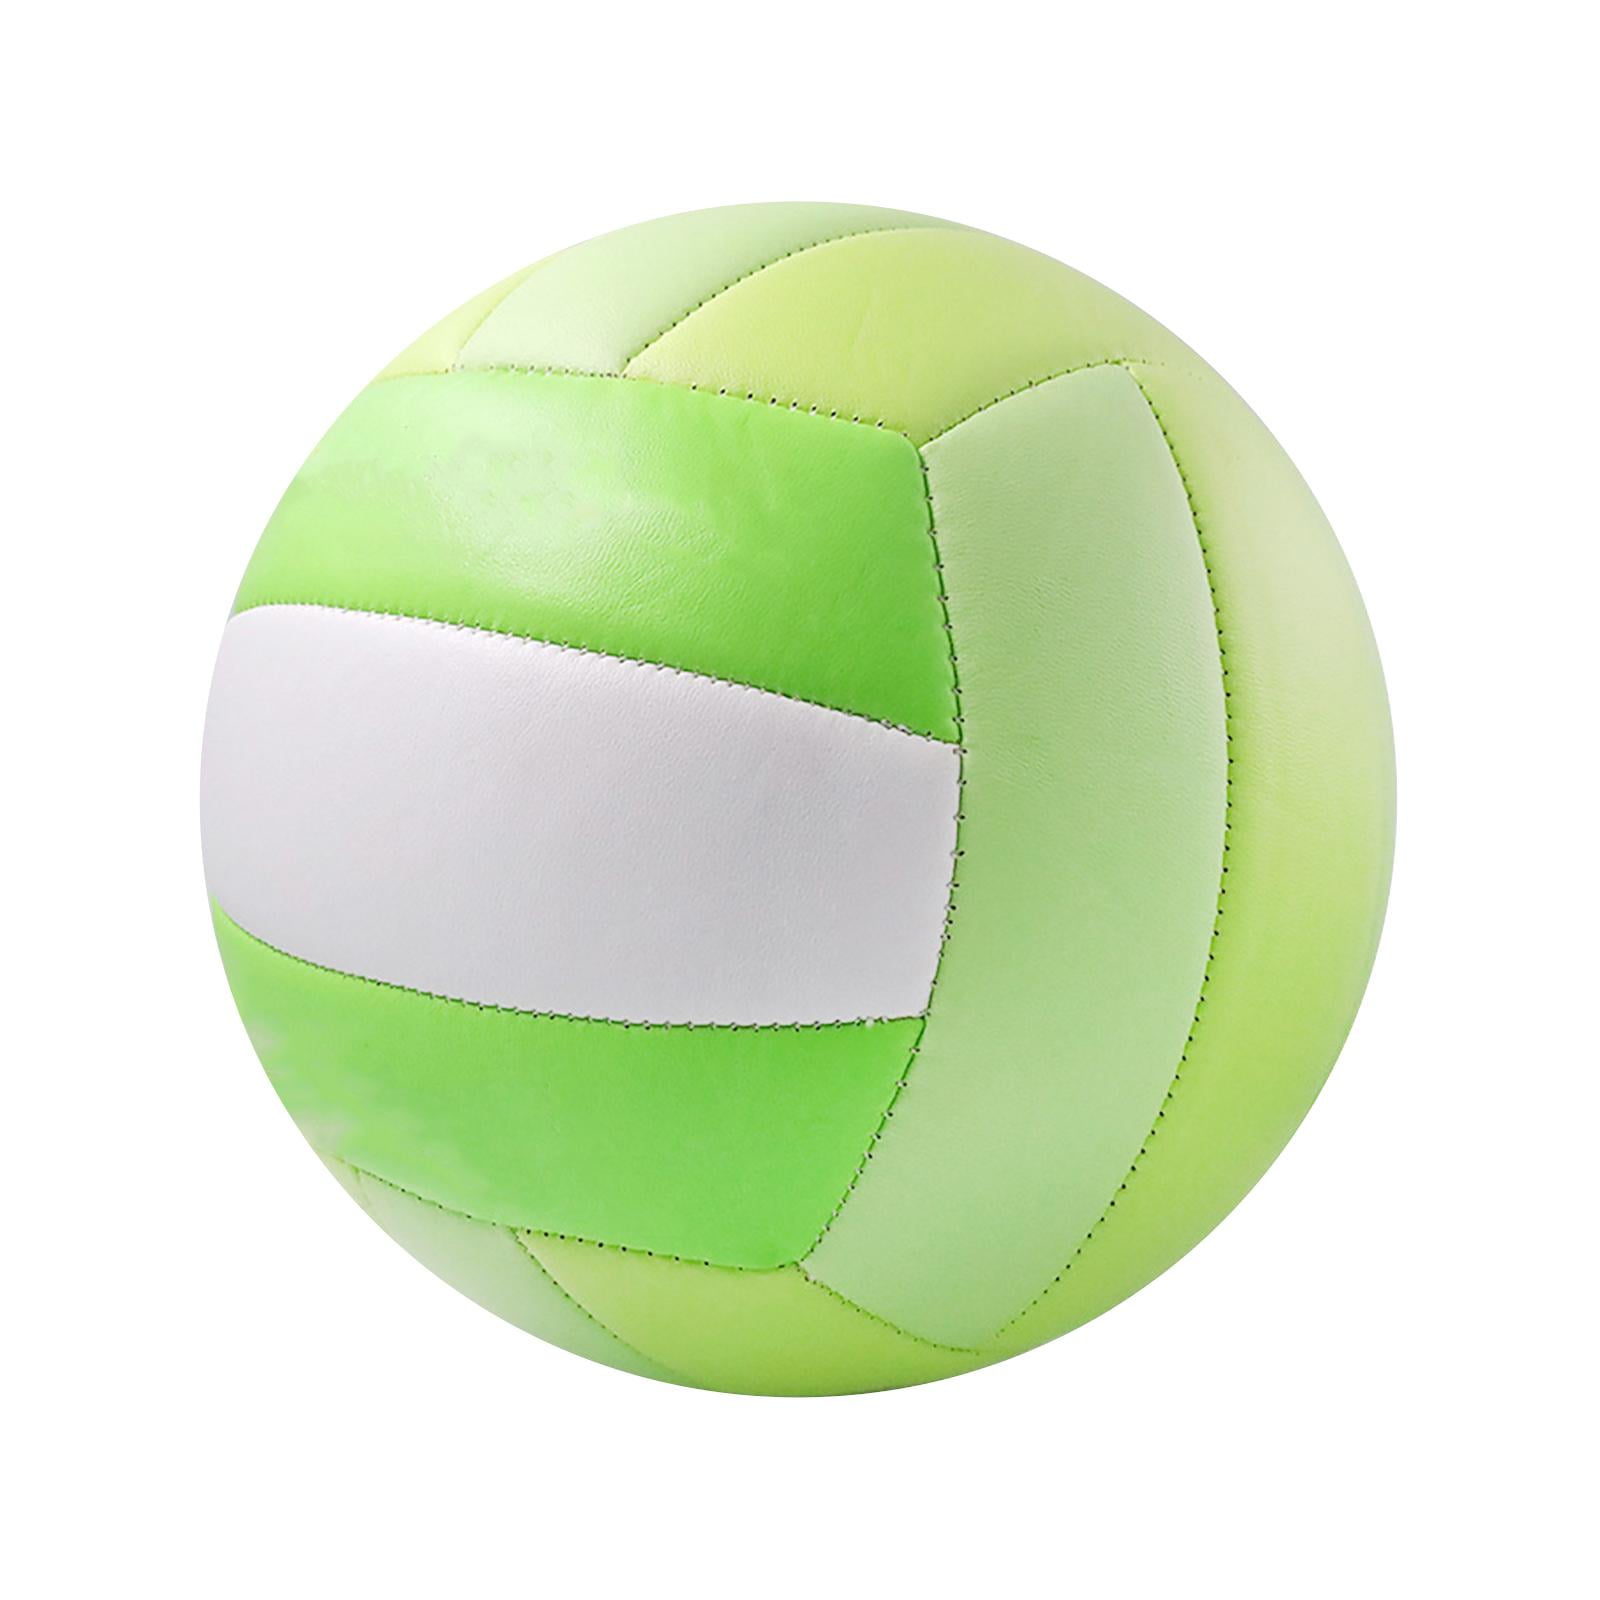 Size 5 Volleyball Pu Leather Match Training Volley Sports Beach Gym Game  Ball